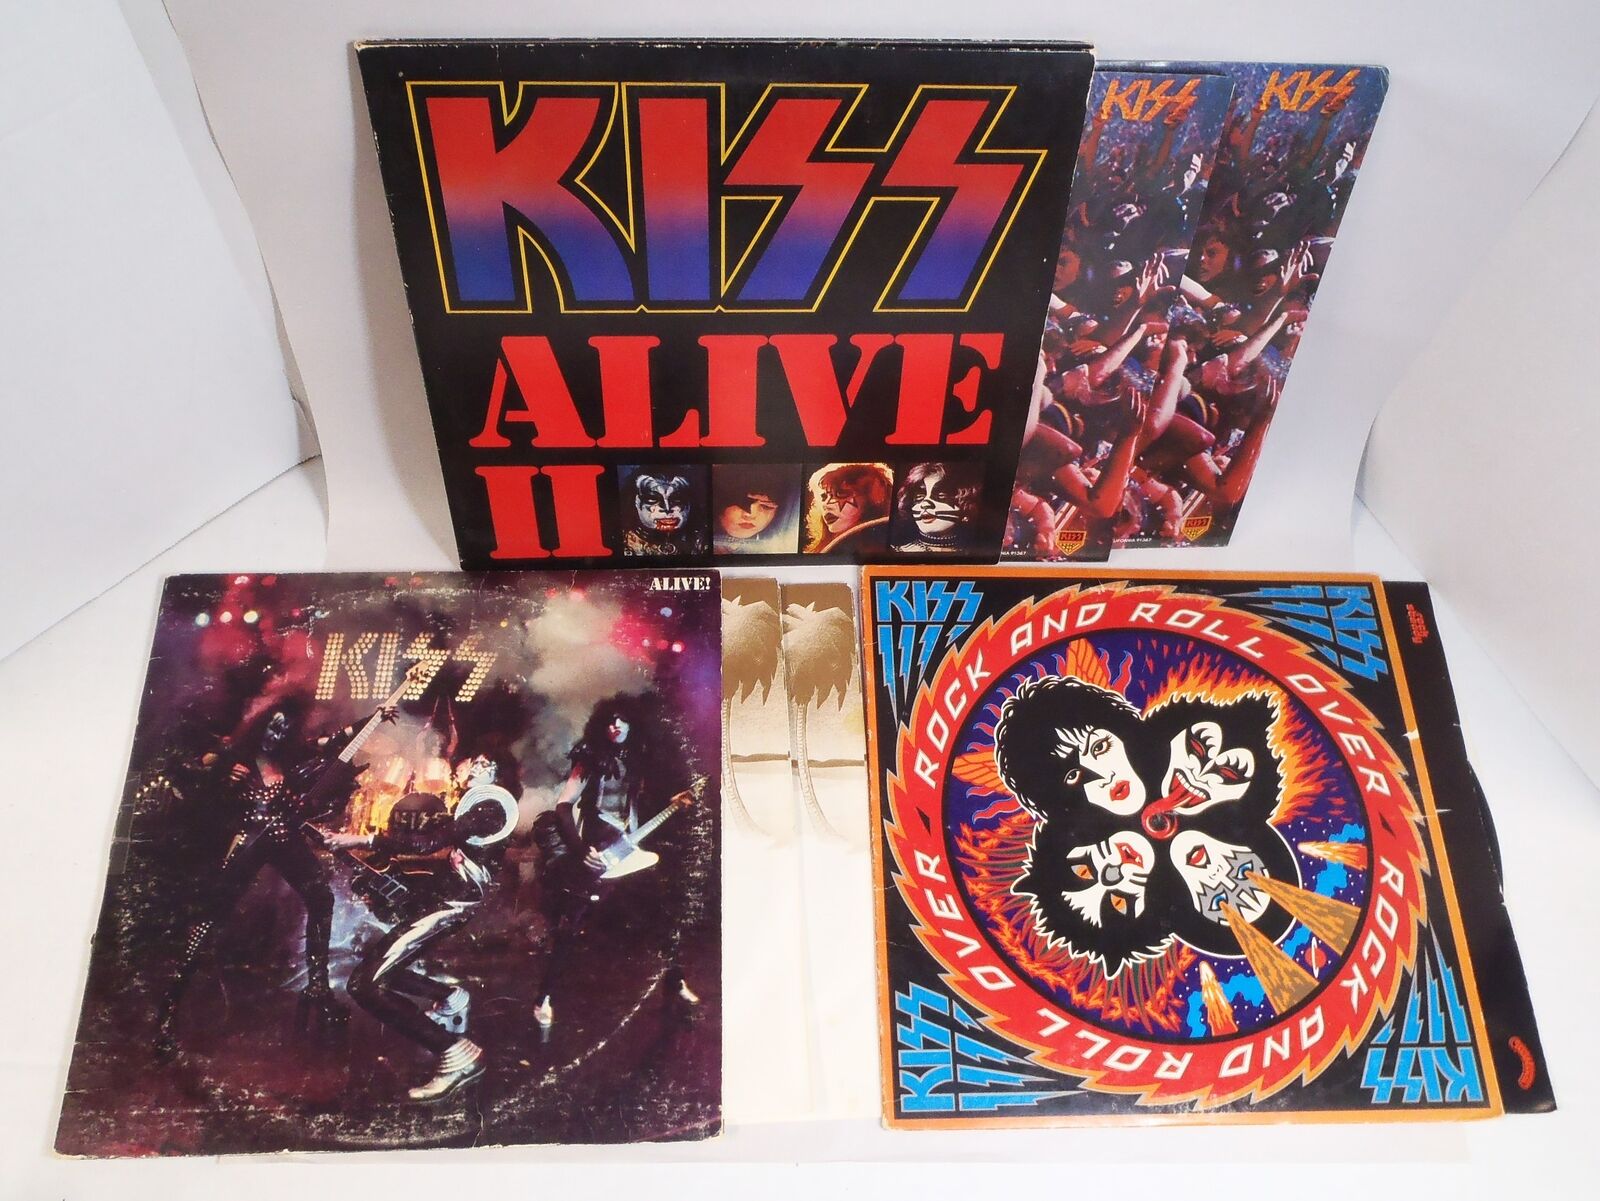 KISS - ALIVE NBLP 7020, ALIVE II 7076, ROCK AND ROLL OVER 7037 Vinyl LPs G/VG+